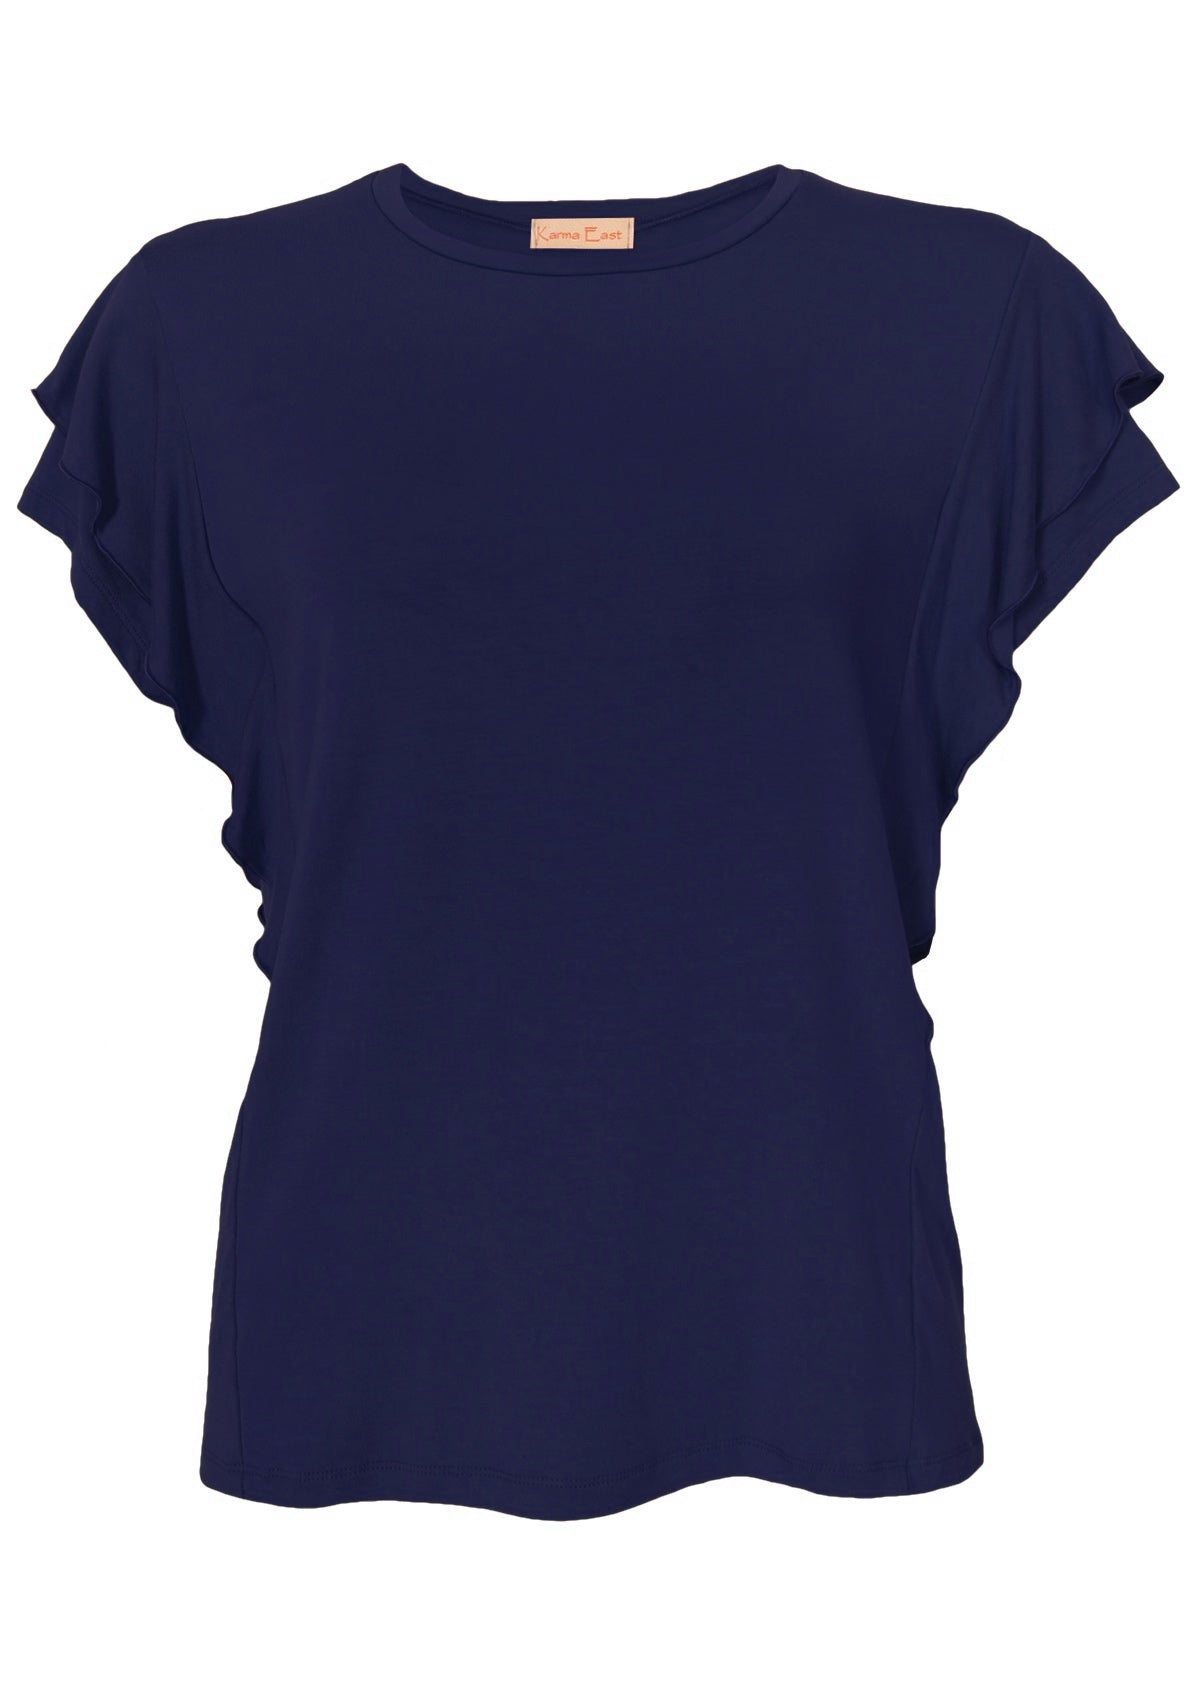 Front view of a navy blue ruffle rayon top.